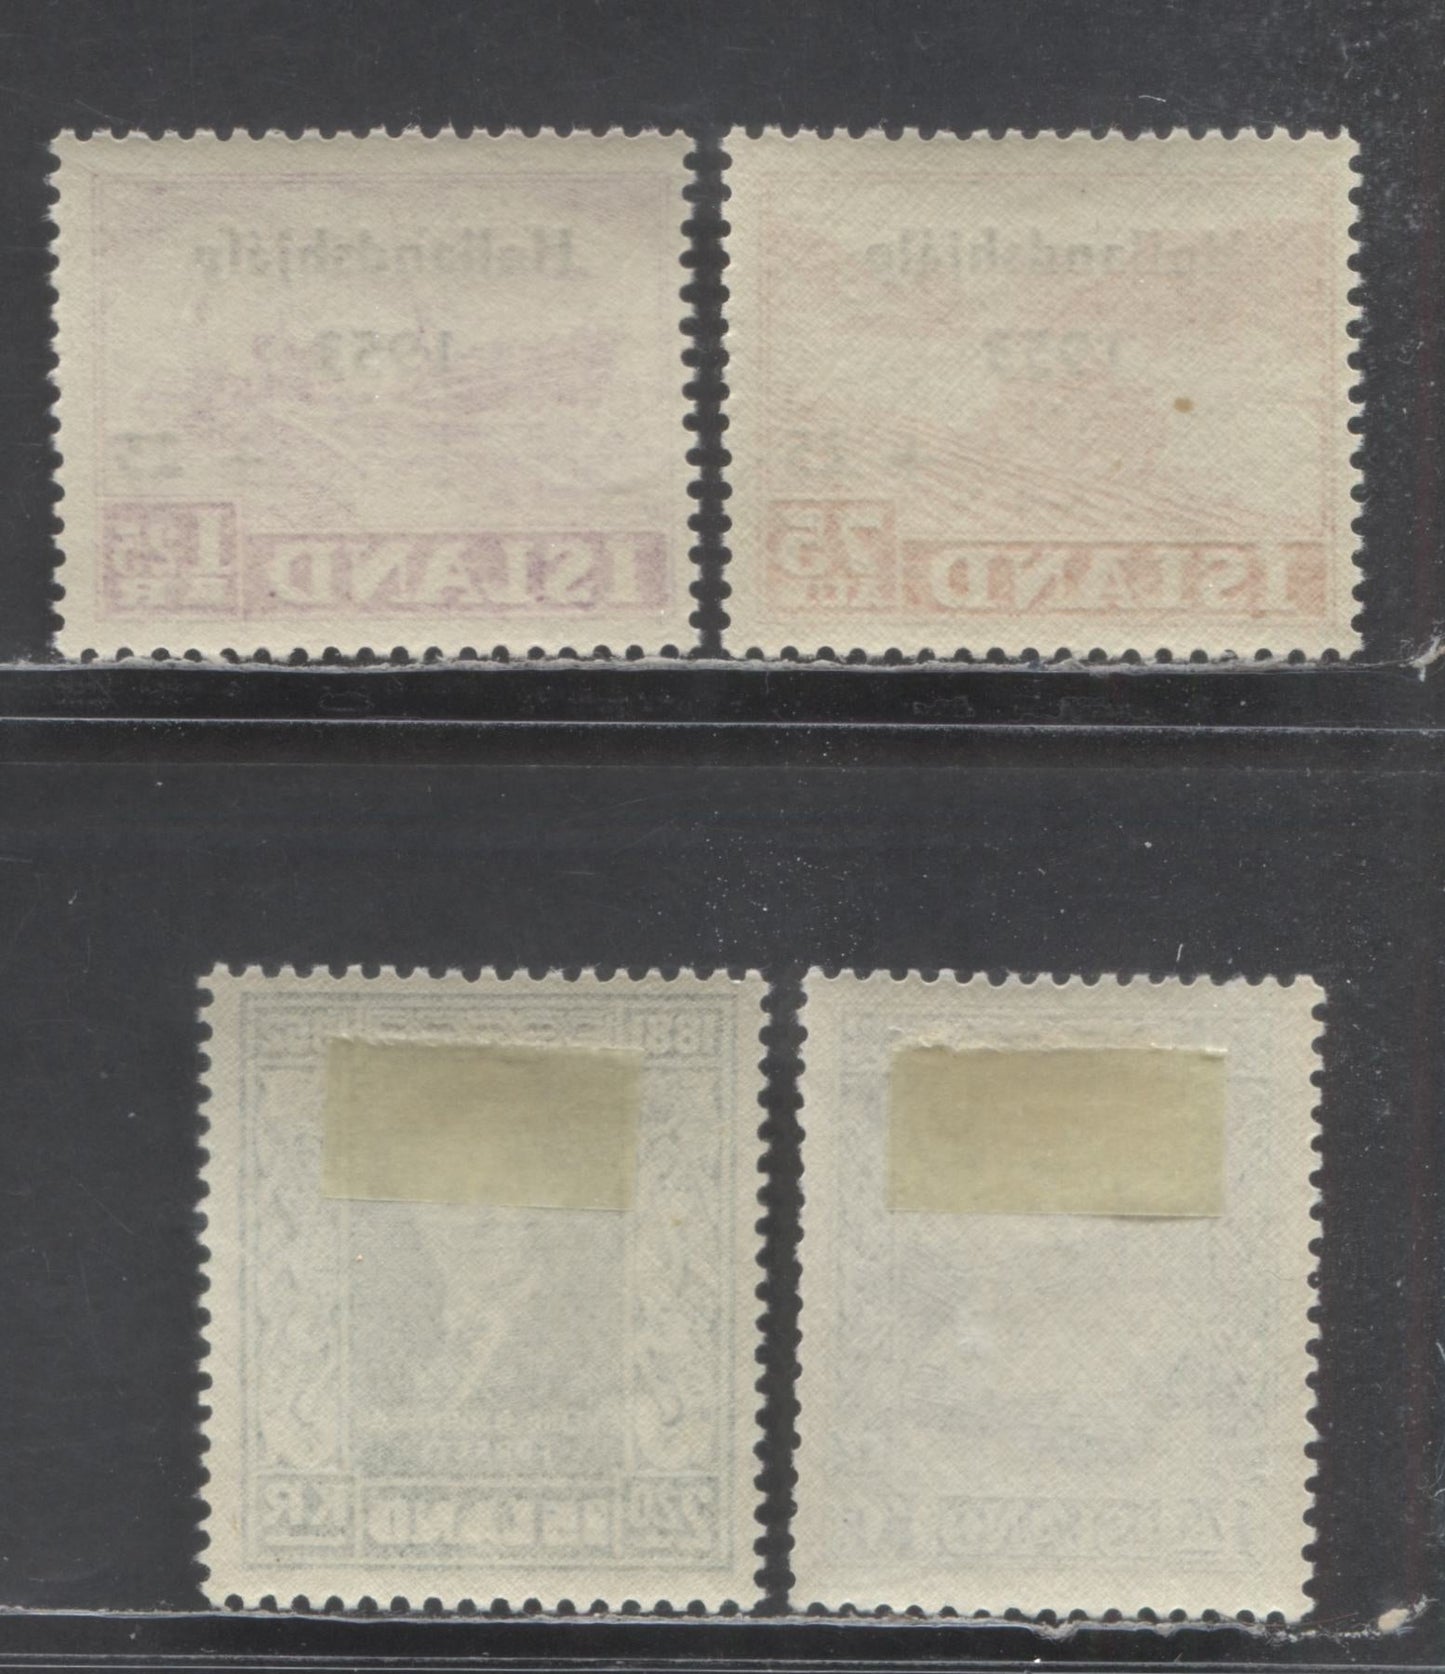 Lot 96 Iceland SC#275/B13 1952-1953 Sveinn Bjornsson - Netherlands Flood Relief Semi Postals, 4 VFOG & NH Singles, Click on Listing to See ALL Pictures, Estimated Value $21